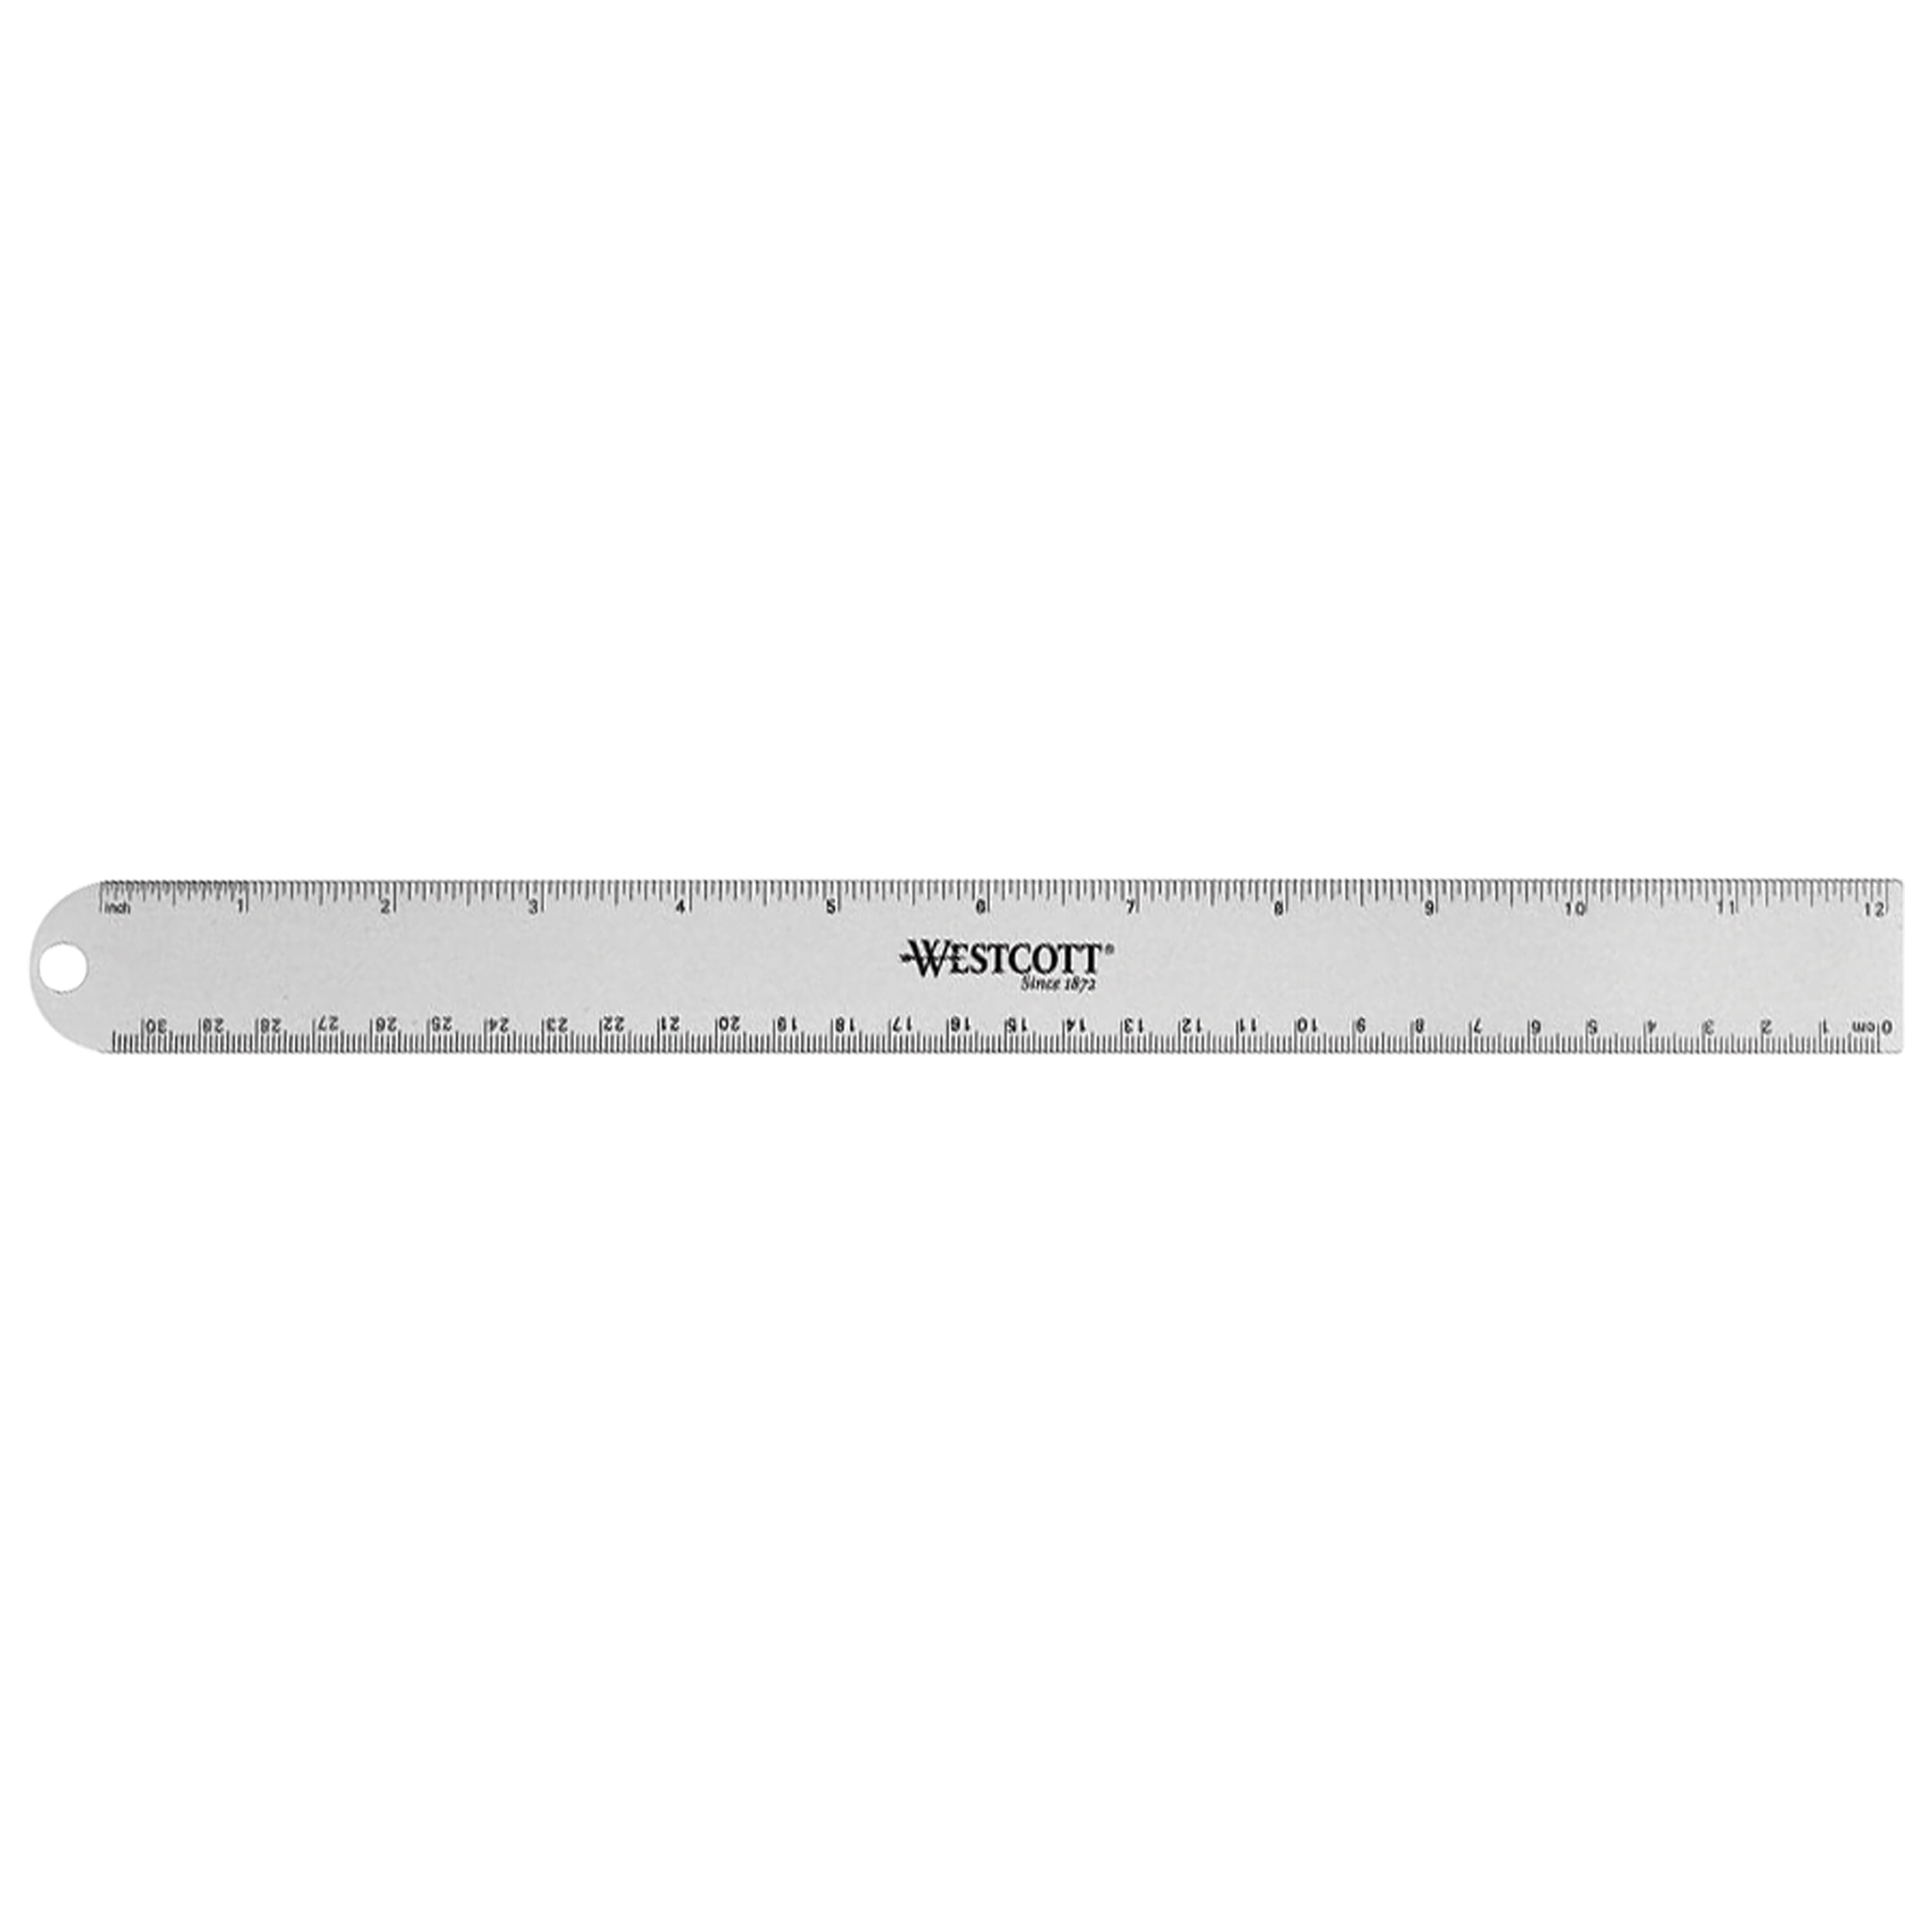 POWERTEC 38-inch Anodized Aluminum Straight Edge Ruler, Metal Straightedge  Machined Flat to Within 0.001 Over Full 38-inch, 71332 